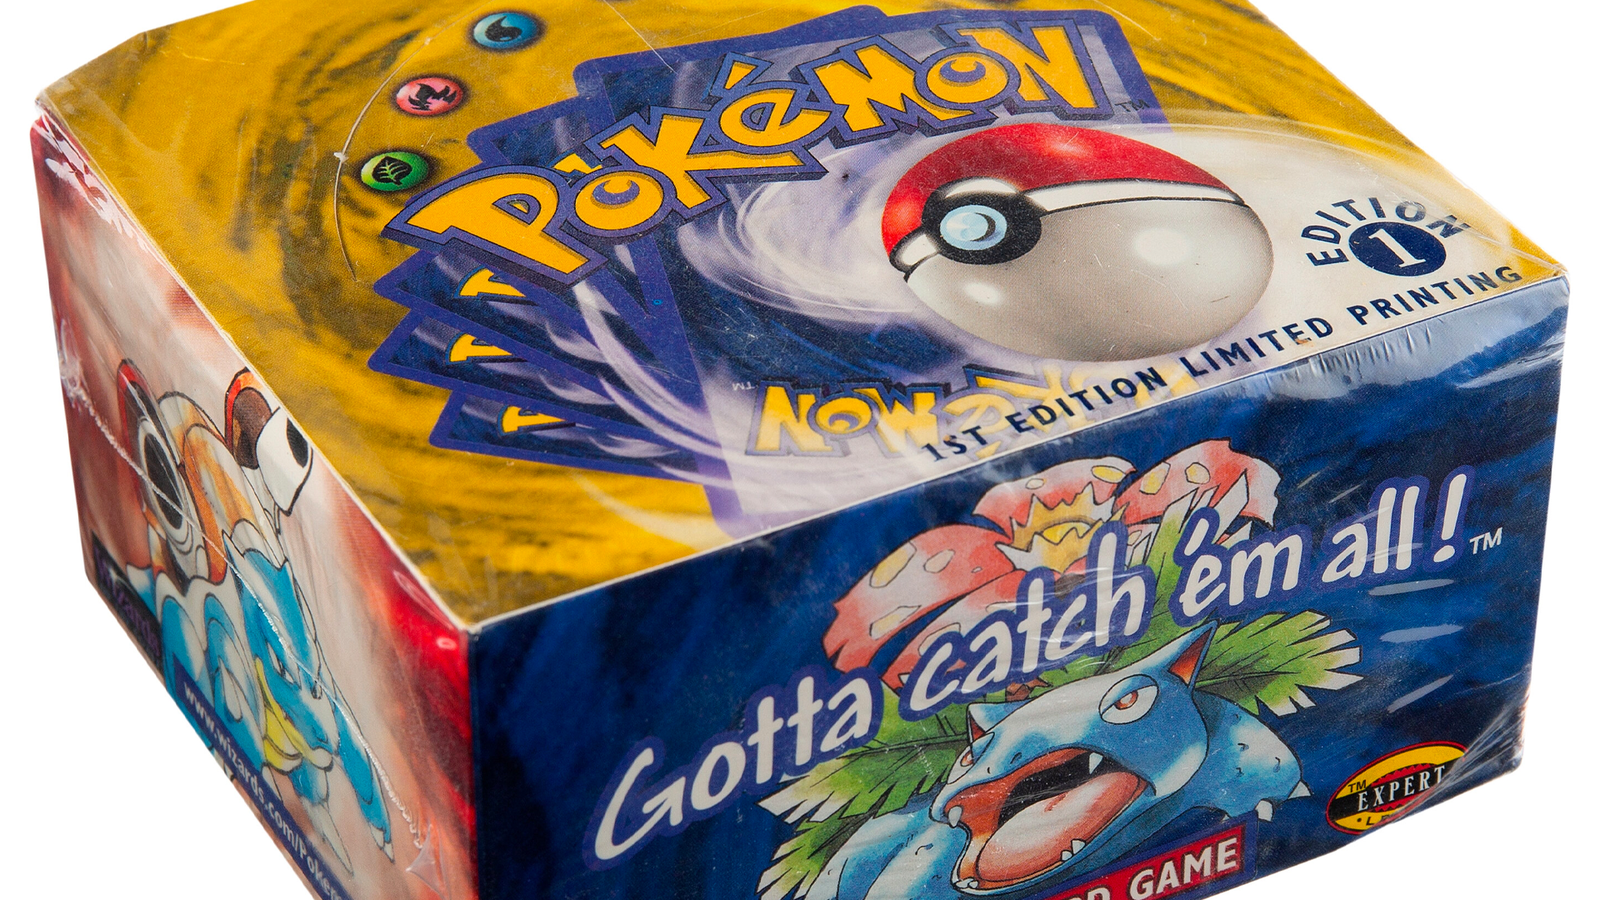 Sealed Pokémon TCG booster box fetches $384,000 at auction | Dicebreaker